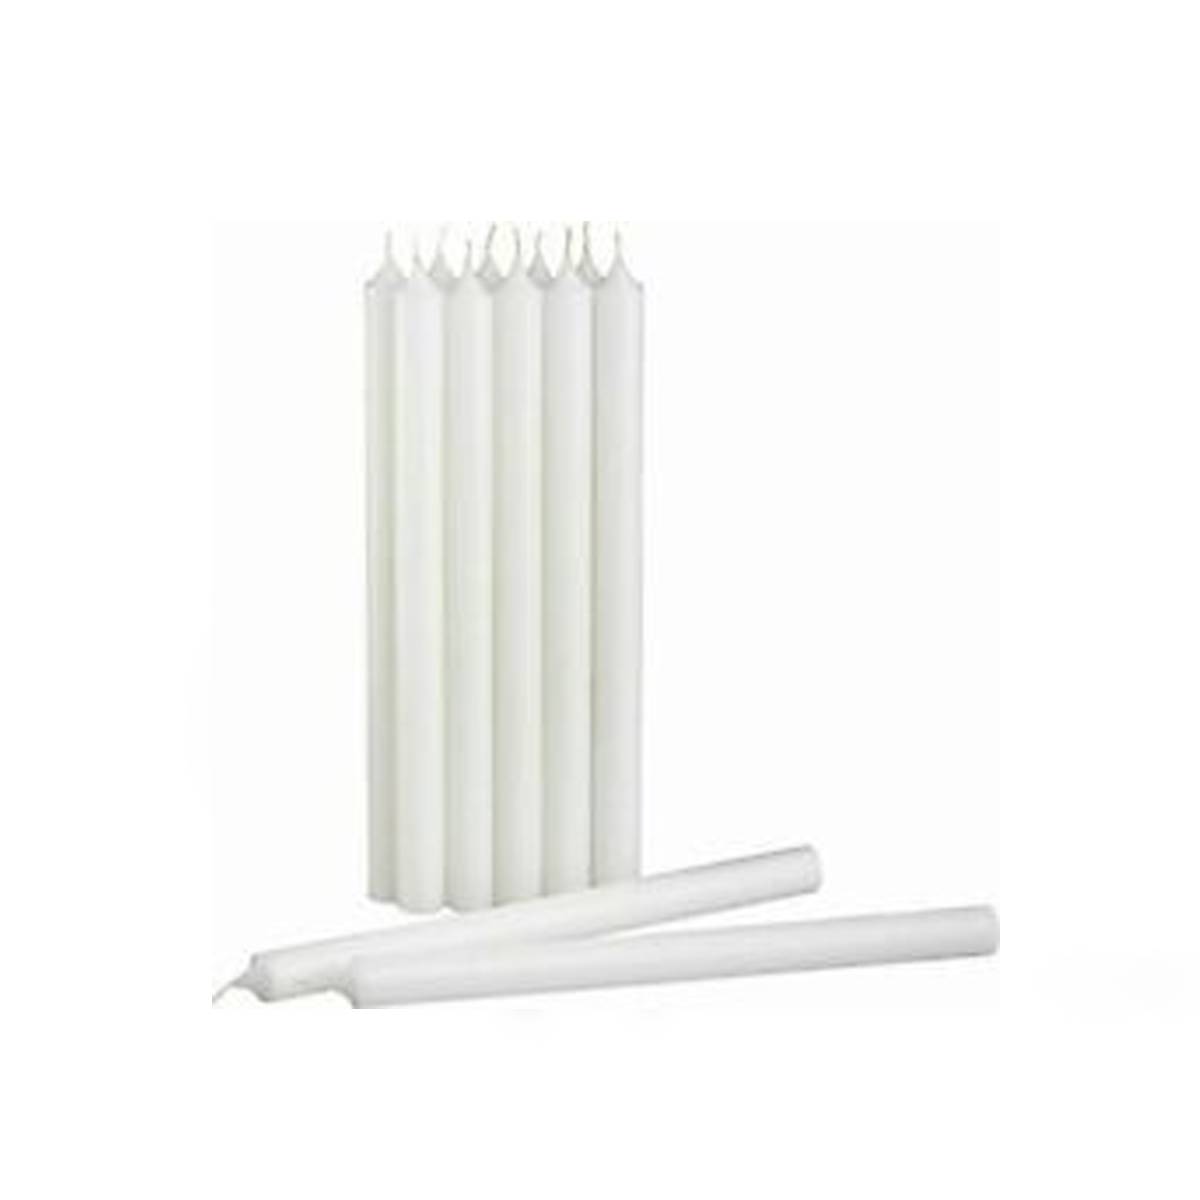 Candles 400g 21pc